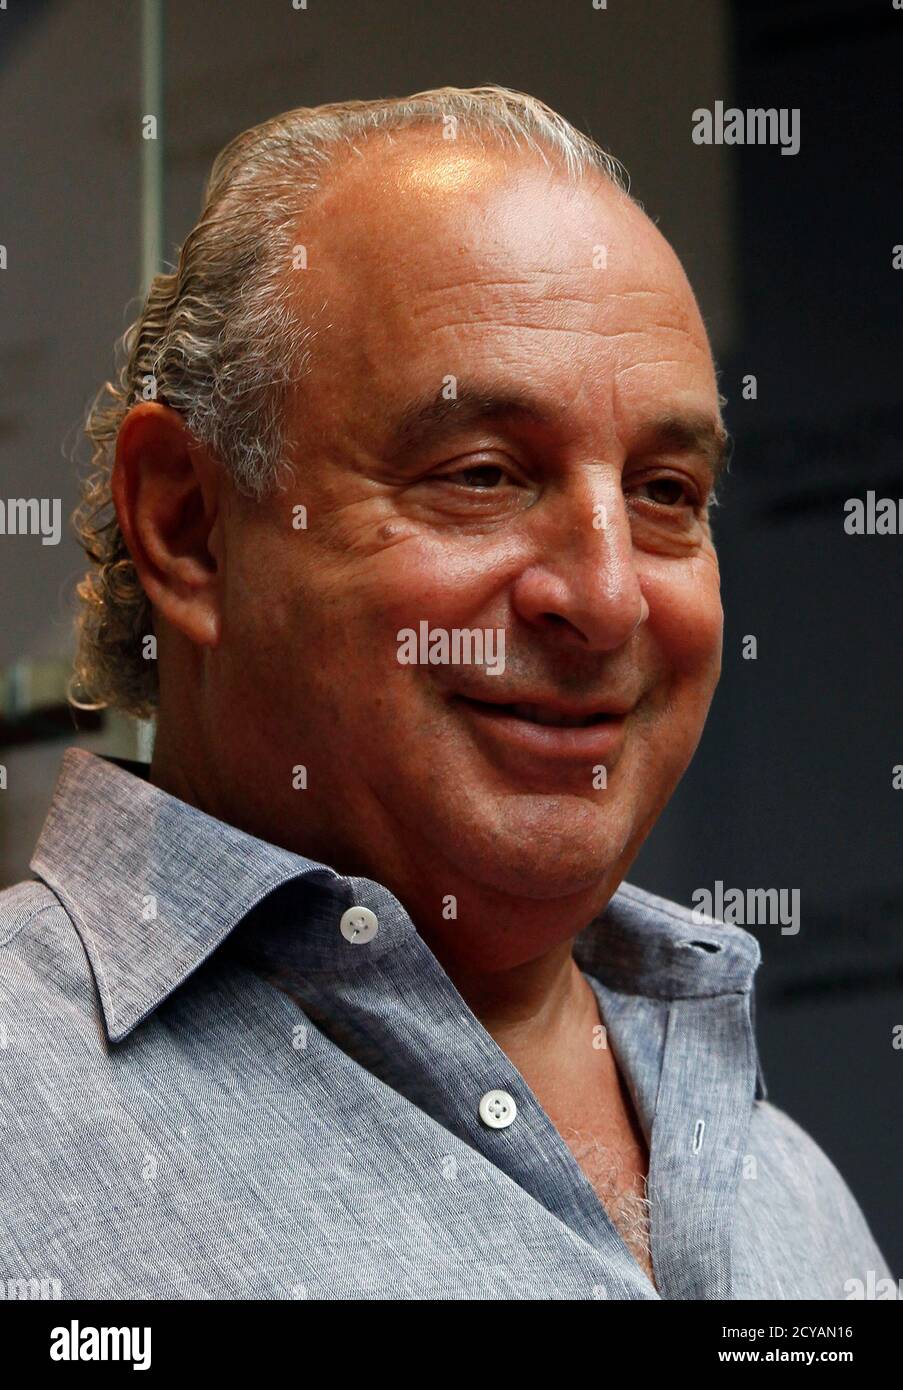 British billionaire and CEO of the Arcadia Group Philip Green attends the  opening ceremony of a Topshop flagship store in Hong Kong June 6, 2013.  British fashion brand Topshop opened a 14,000